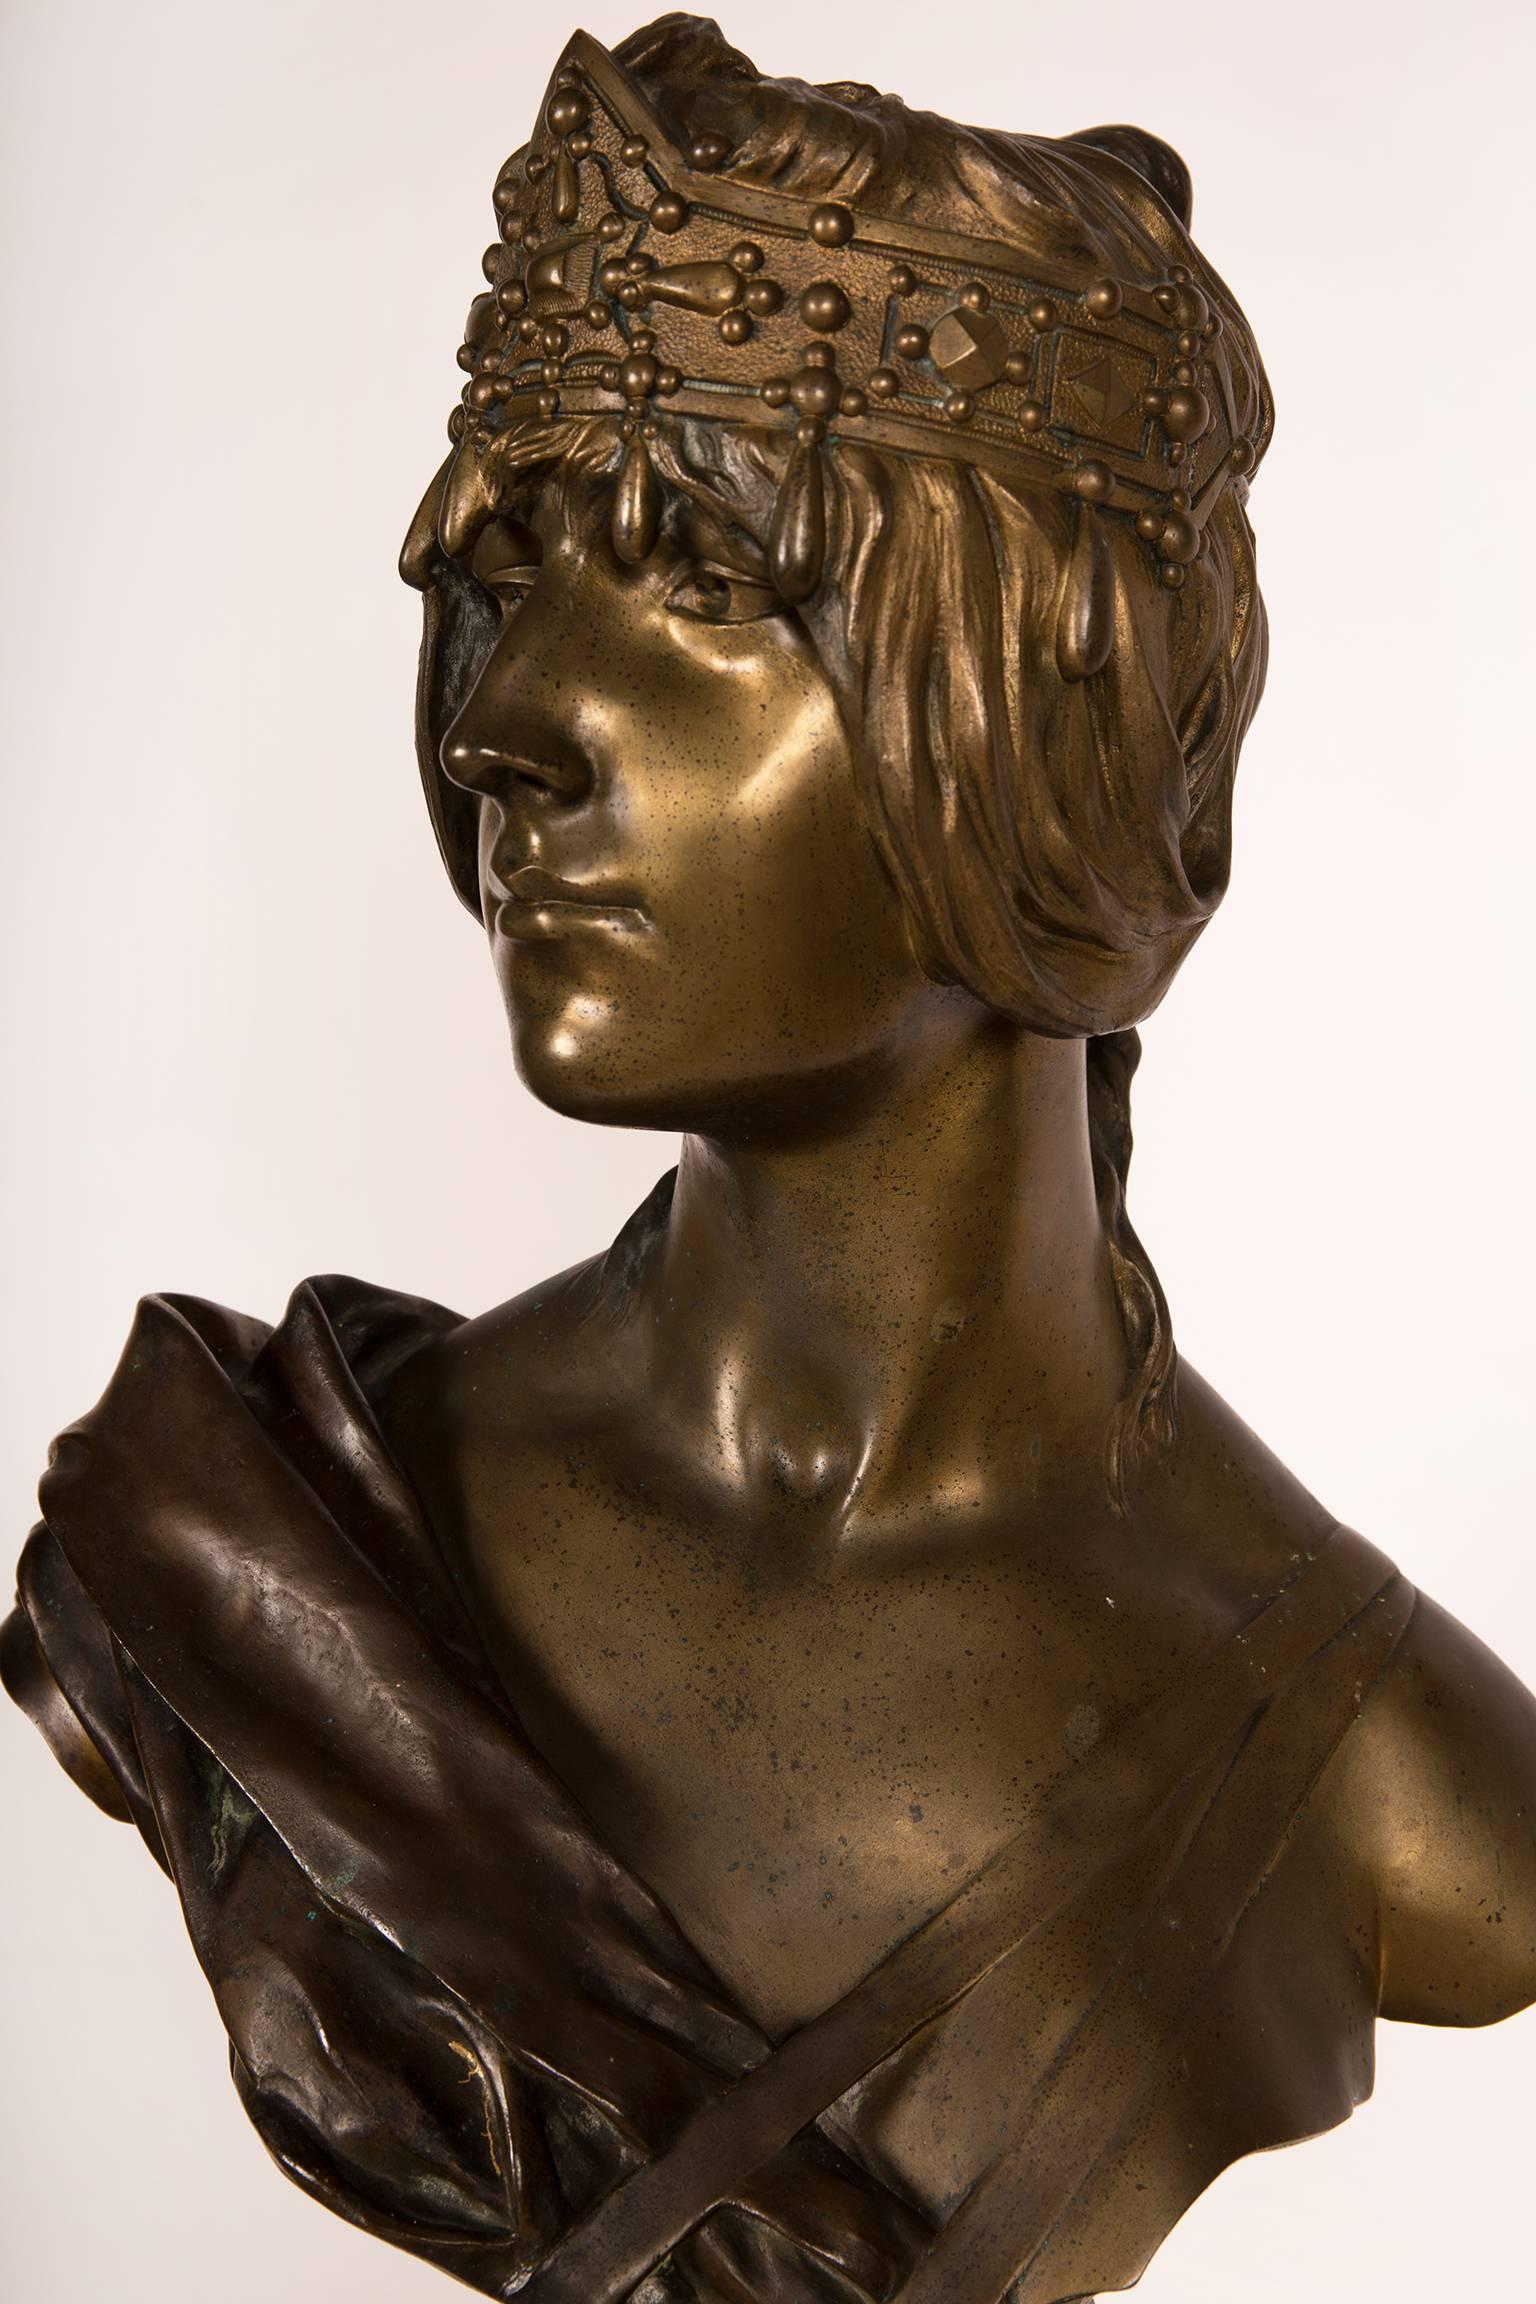 Good quality bronze bust in the Art Nouveau Orientalist style, signed on the base and with foundry mark: GAUTIER BRONZIER. Signed by George Coudray, a French sculptor active between 1883 and 1932. He was a pupil of Falguiere and exhibited at the